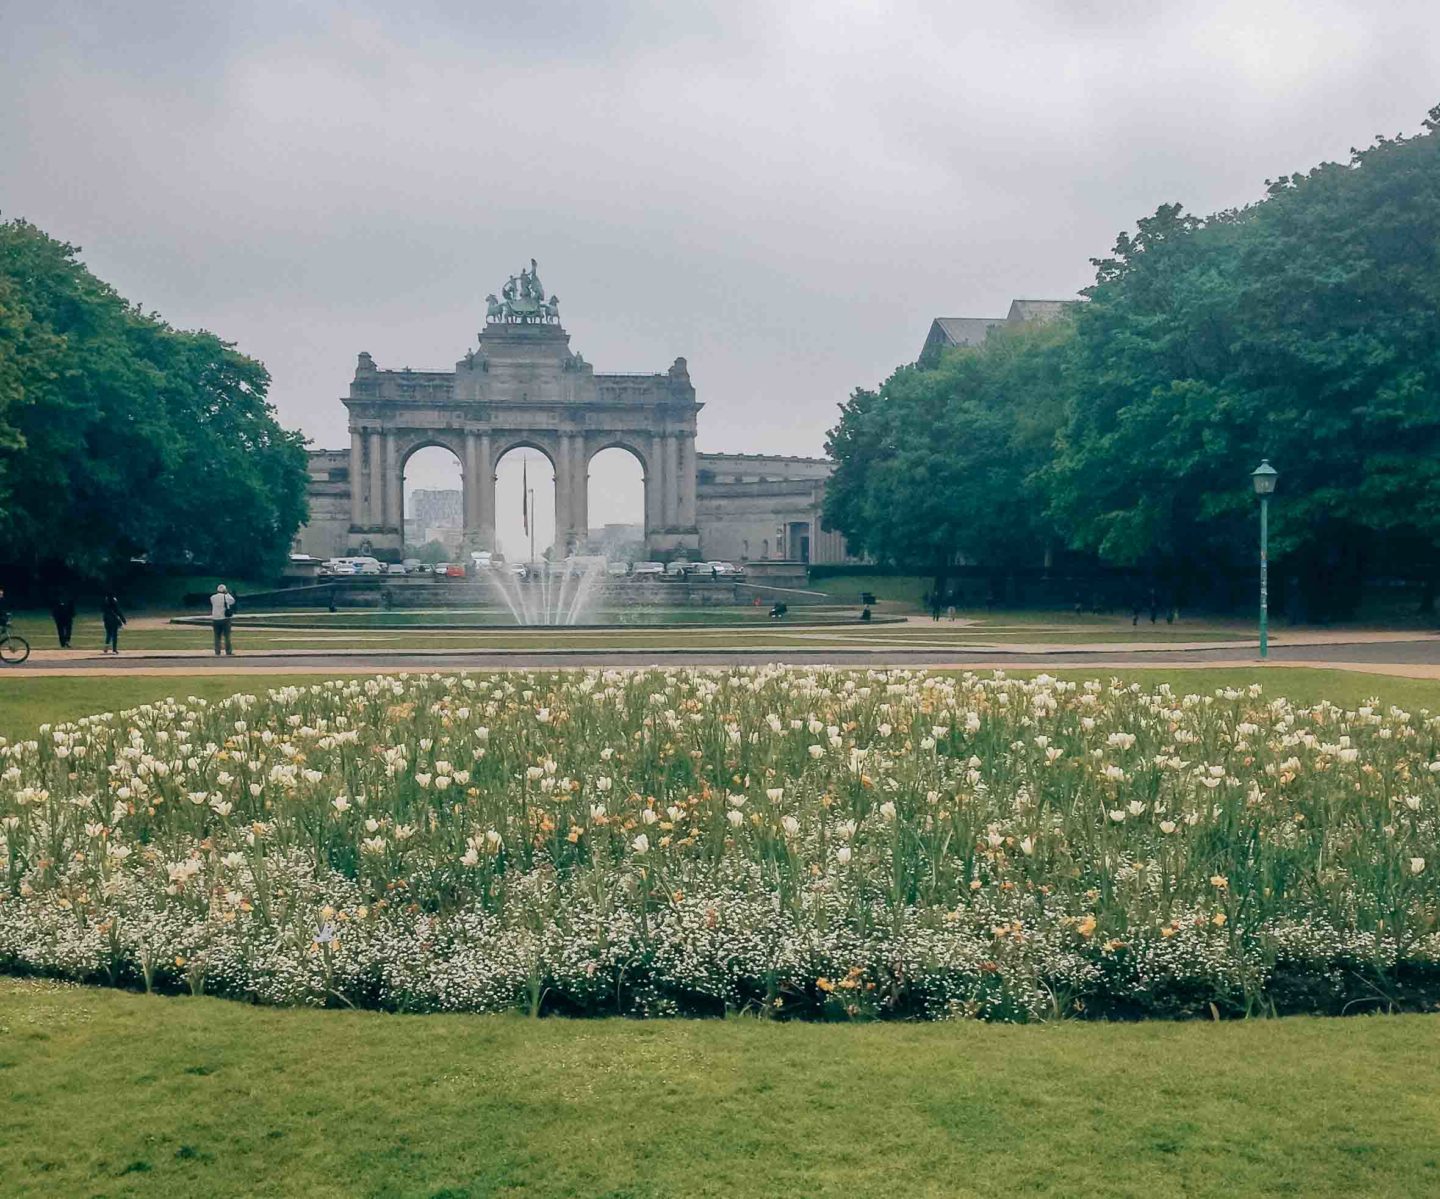 The Cinquantenaire park in Brussels, a perfect strolling area